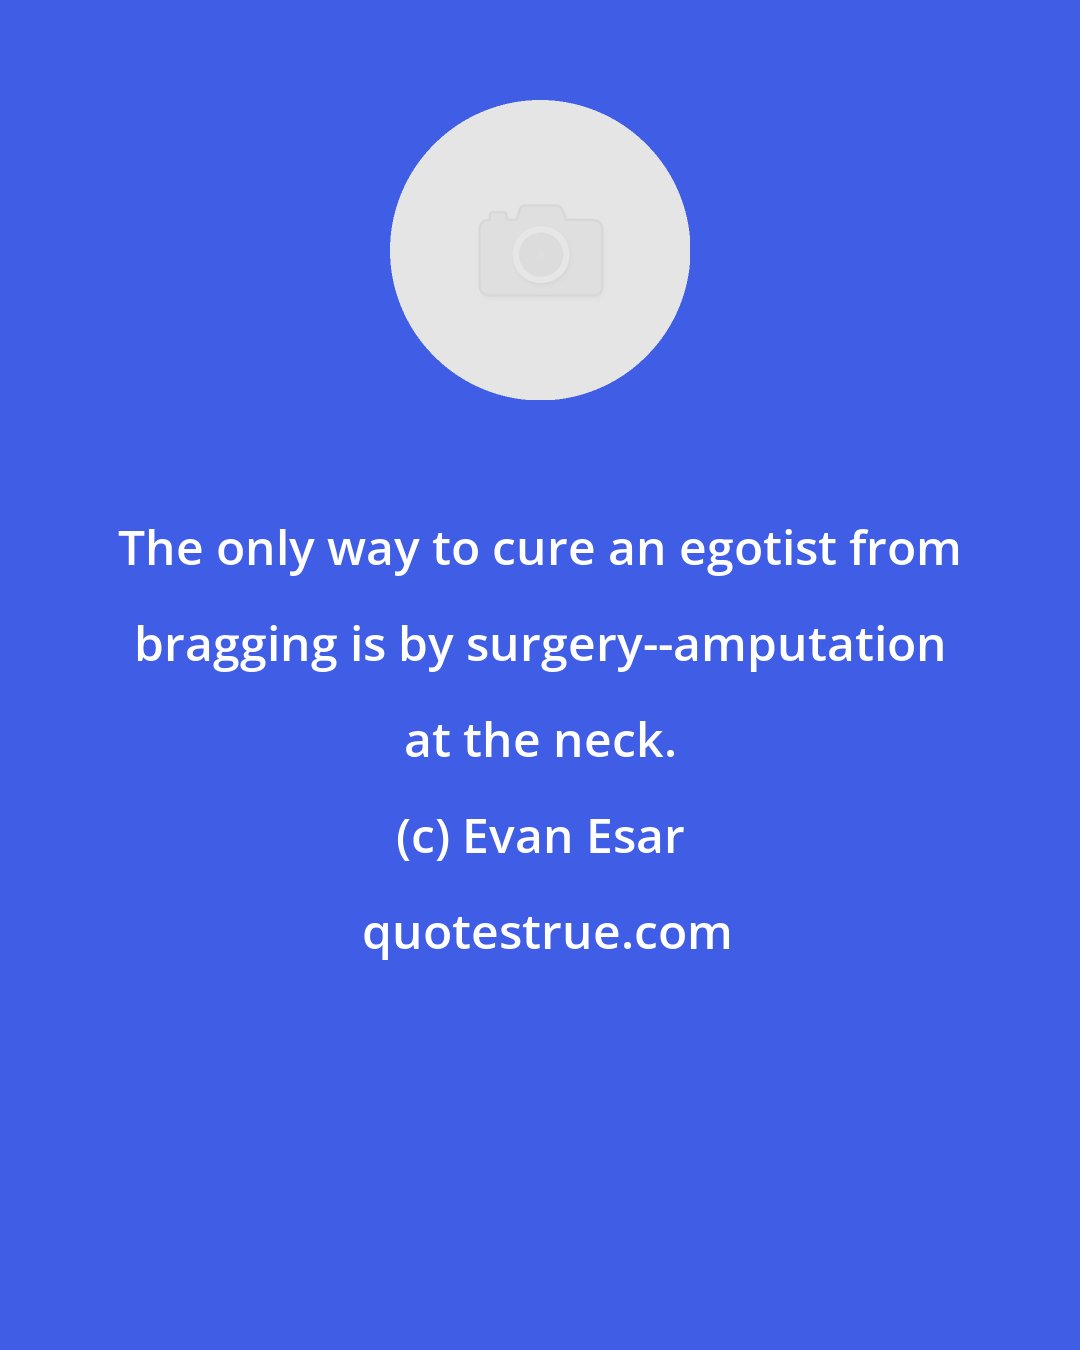 Evan Esar: The only way to cure an egotist from bragging is by surgery--amputation at the neck.